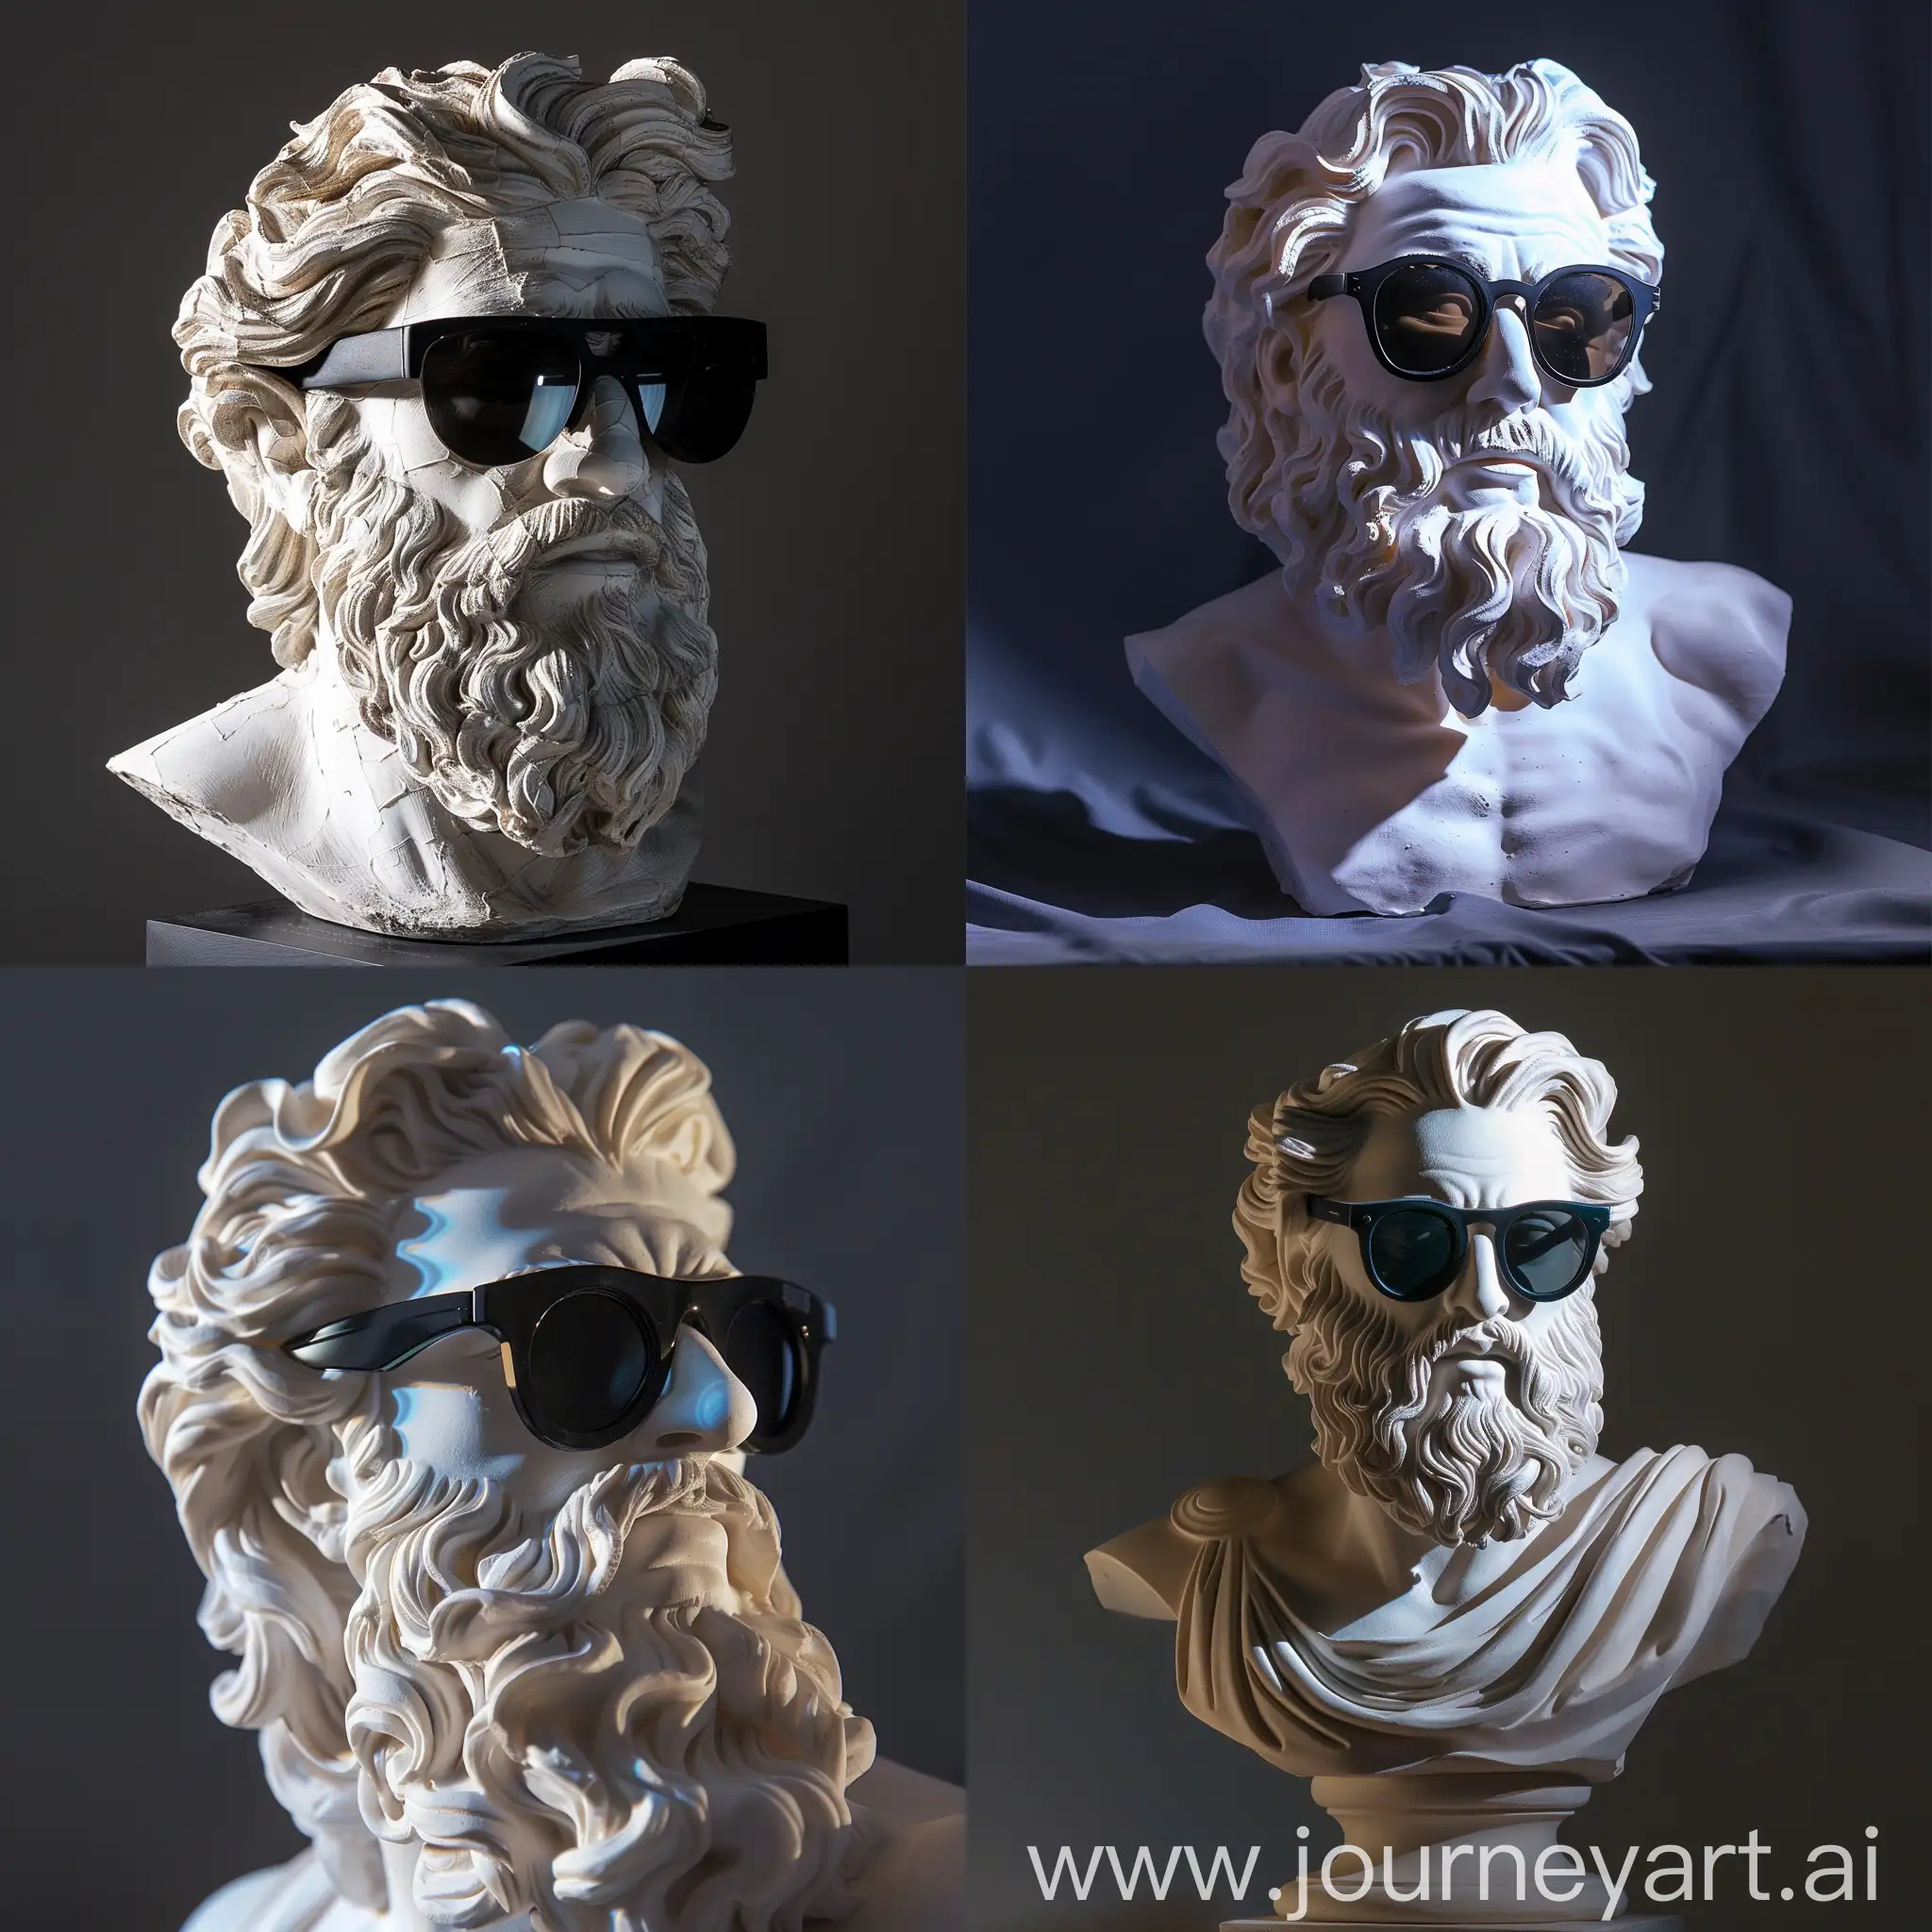 Modern-Zeus-Sculpture-with-Black-Sunglasses-and-White-Light-Reflections-on-Dark-Background